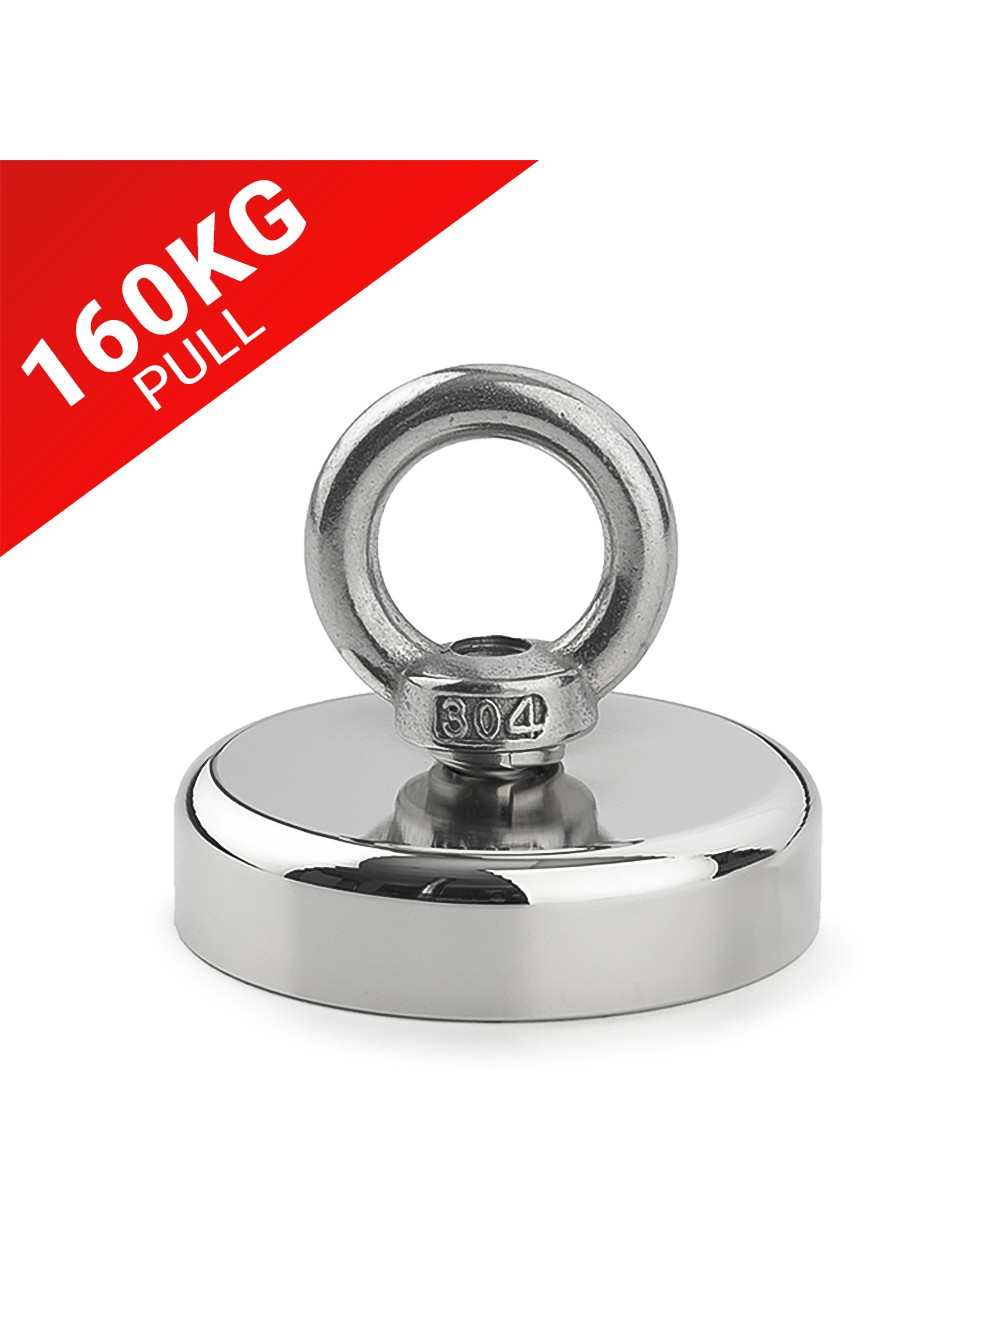 160KG Recovery Super Strong Pull Sea Fishing Magnet Hunting Charm Eyebolt 